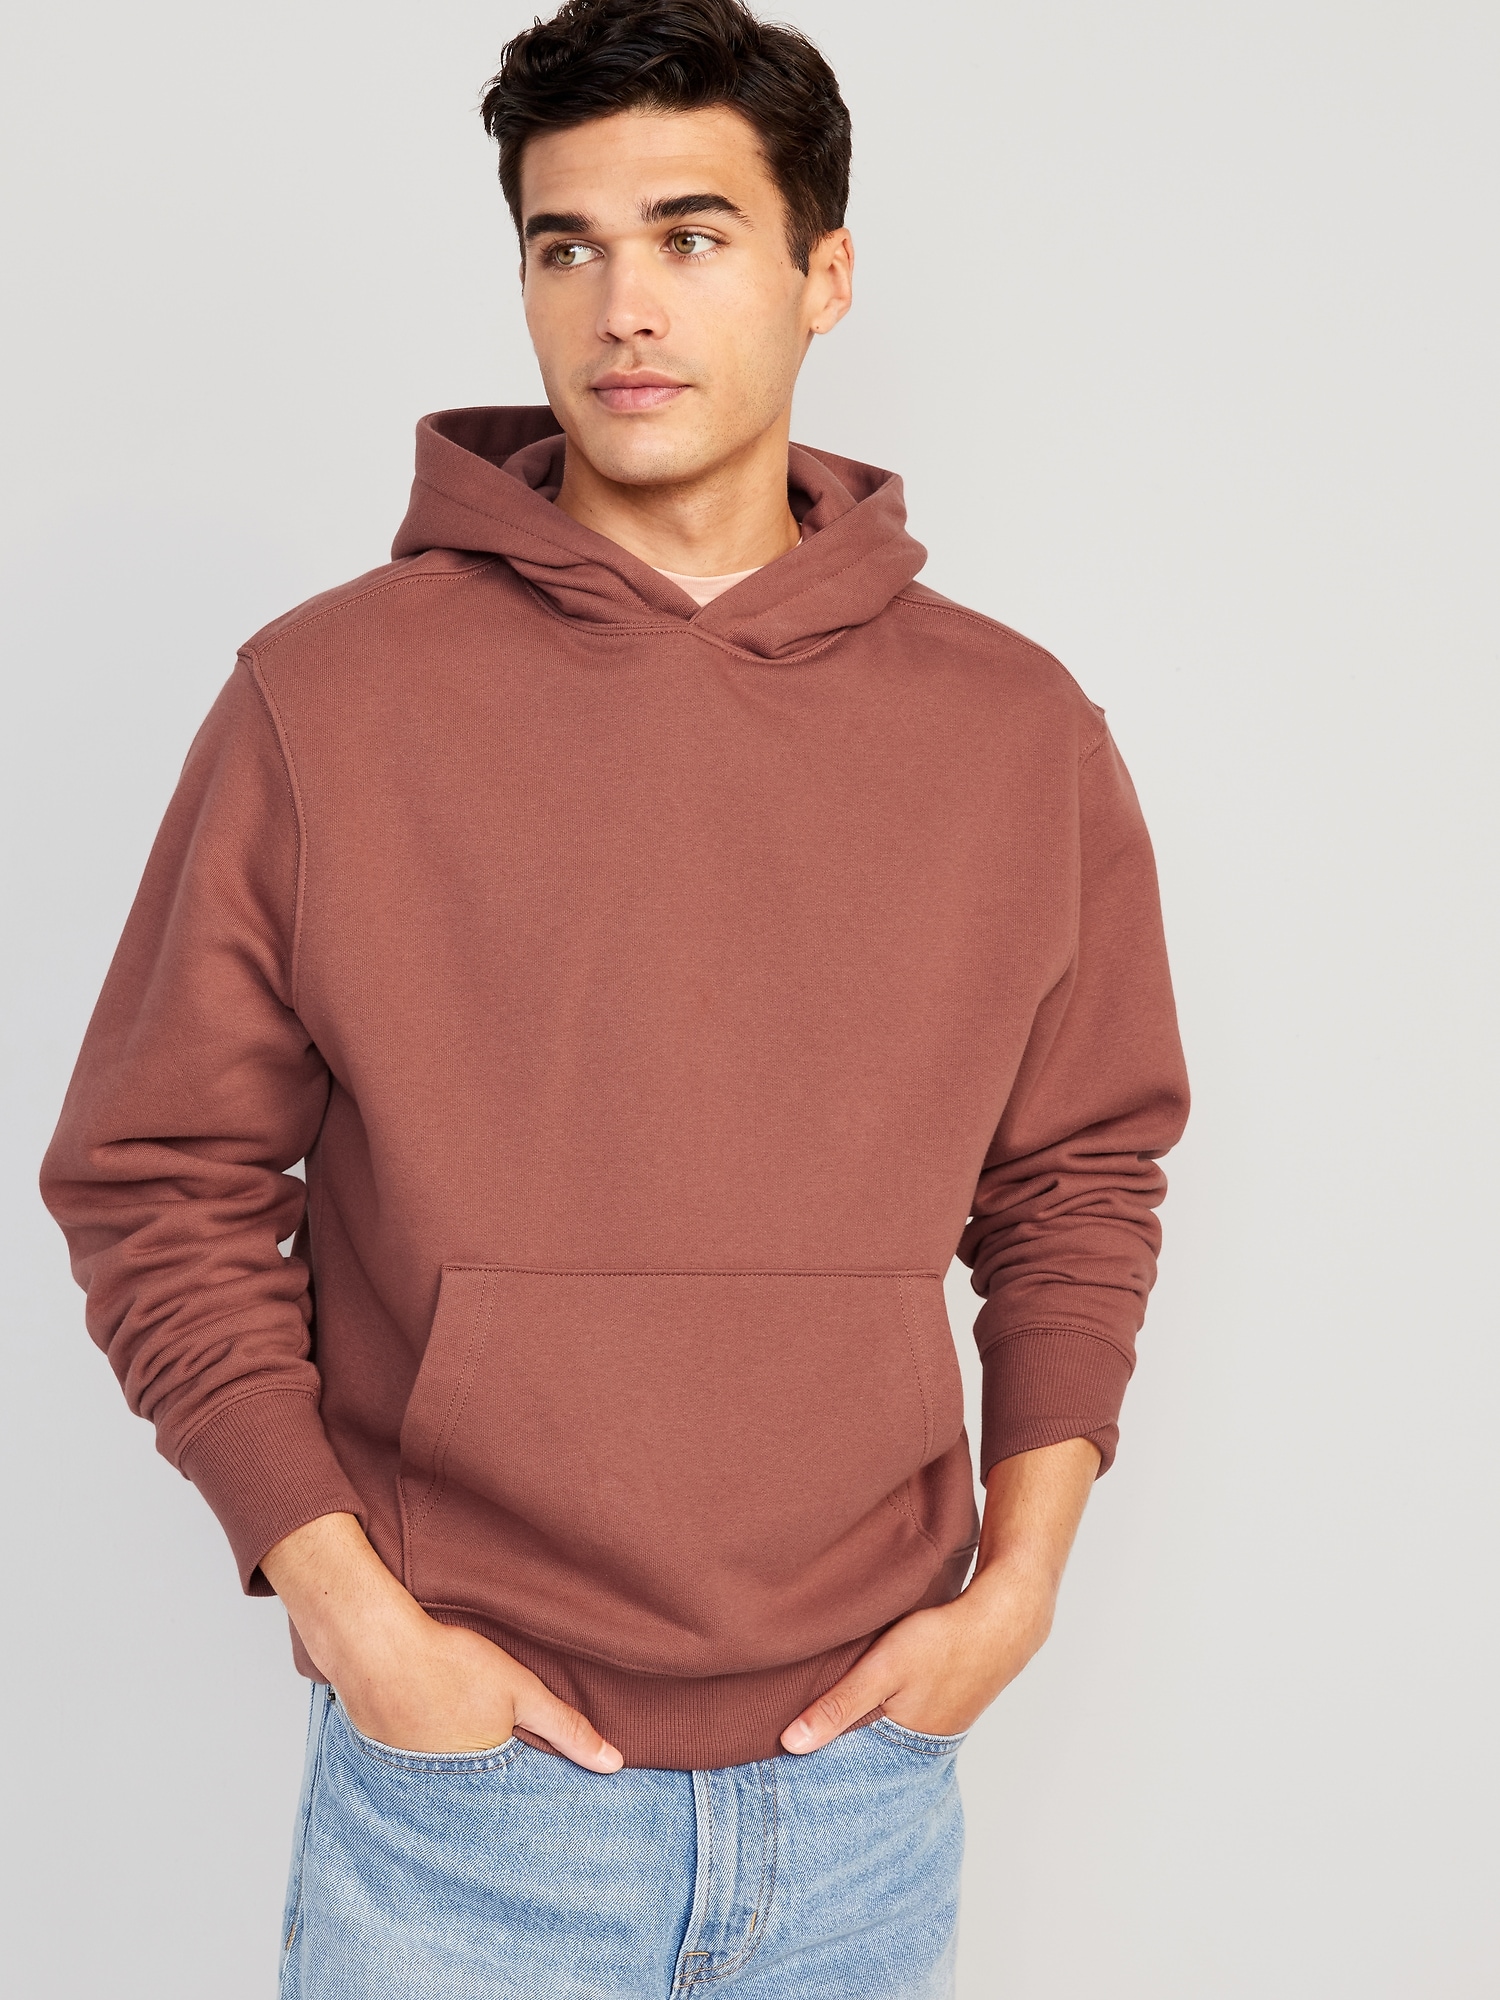 Old Navy Men's Classic Pullover Hoodie - - Tall Size XXXL